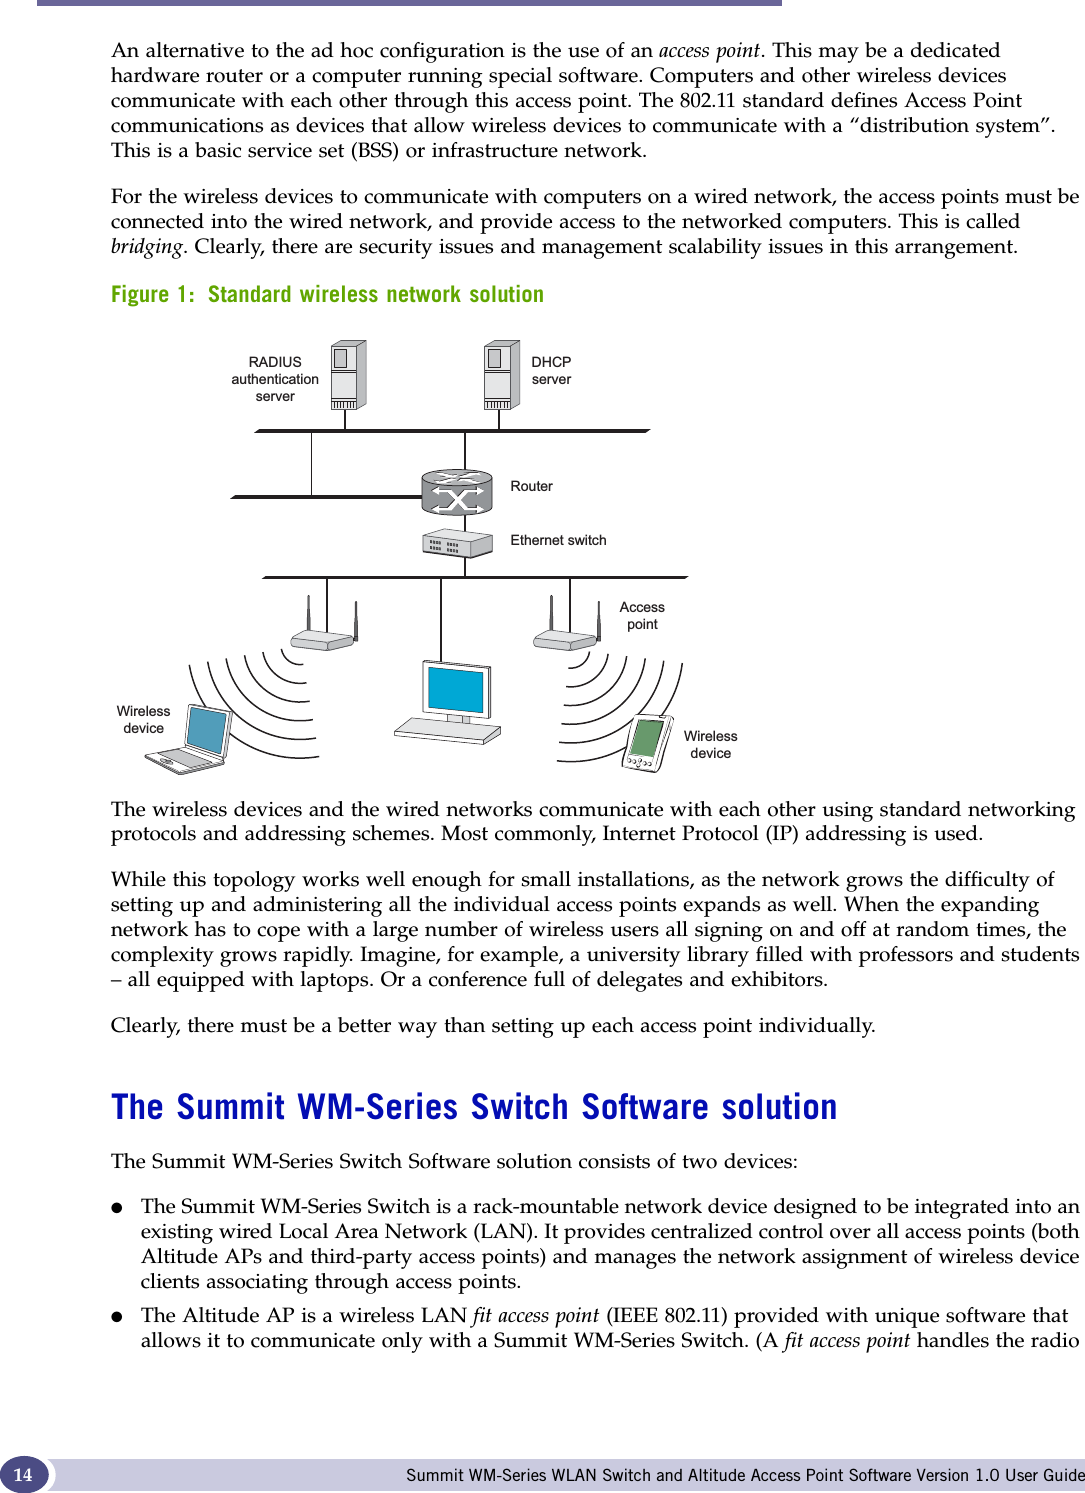 The Summit WM-Series Switch Software solution Summit WM-Series WLAN Switch and Altitude Access Point Software Version 1.0 User Guide14An alternative to the ad hoc configuration is the use of an access point. This may be a dedicated hardware router or a computer running special software. Computers and other wireless devices communicate with each other through this access point. The 802.11 standard defines Access Point communications as devices that allow wireless devices to communicate with a “distribution system”. This is a basic service set (BSS) or infrastructure network.For the wireless devices to communicate with computers on a wired network, the access points must be connected into the wired network, and provide access to the networked computers. This is called bridging. Clearly, there are security issues and management scalability issues in this arrangement.Figure 1: Standard wireless network solutionThe wireless devices and the wired networks communicate with each other using standard networking protocols and addressing schemes. Most commonly, Internet Protocol (IP) addressing is used.While this topology works well enough for small installations, as the network grows the difficulty of setting up and administering all the individual access points expands as well. When the expanding network has to cope with a large number of wireless users all signing on and off at random times, the complexity grows rapidly. Imagine, for example, a university library filled with professors and students – all equipped with laptops. Or a conference full of delegates and exhibitors.Clearly, there must be a better way than setting up each access point individually. The Summit WM-Series Switch Software solutionThe Summit WM-Series Switch Software solution consists of two devices:●The Summit WM-Series Switch is a rack-mountable network device designed to be integrated into an existing wired Local Area Network (LAN). It provides centralized control over all access points (both Altitude APs and third-party access points) and manages the network assignment of wireless device clients associating through access points.●The Altitude AP is a wireless LAN fit access point (IEEE 802.11) provided with unique software that allows it to communicate only with a Summit WM-Series Switch. (A fit access point handles the radio 5$&apos;,86DXWKHQWLFDWLRQVHUYHU5RXWHU(WKHUQHWVZLWFK&apos;+&amp;3VHUYHU$FFHVVSRLQW:LUHOHVVGHYLFH:LUHOHVVGHYLFH